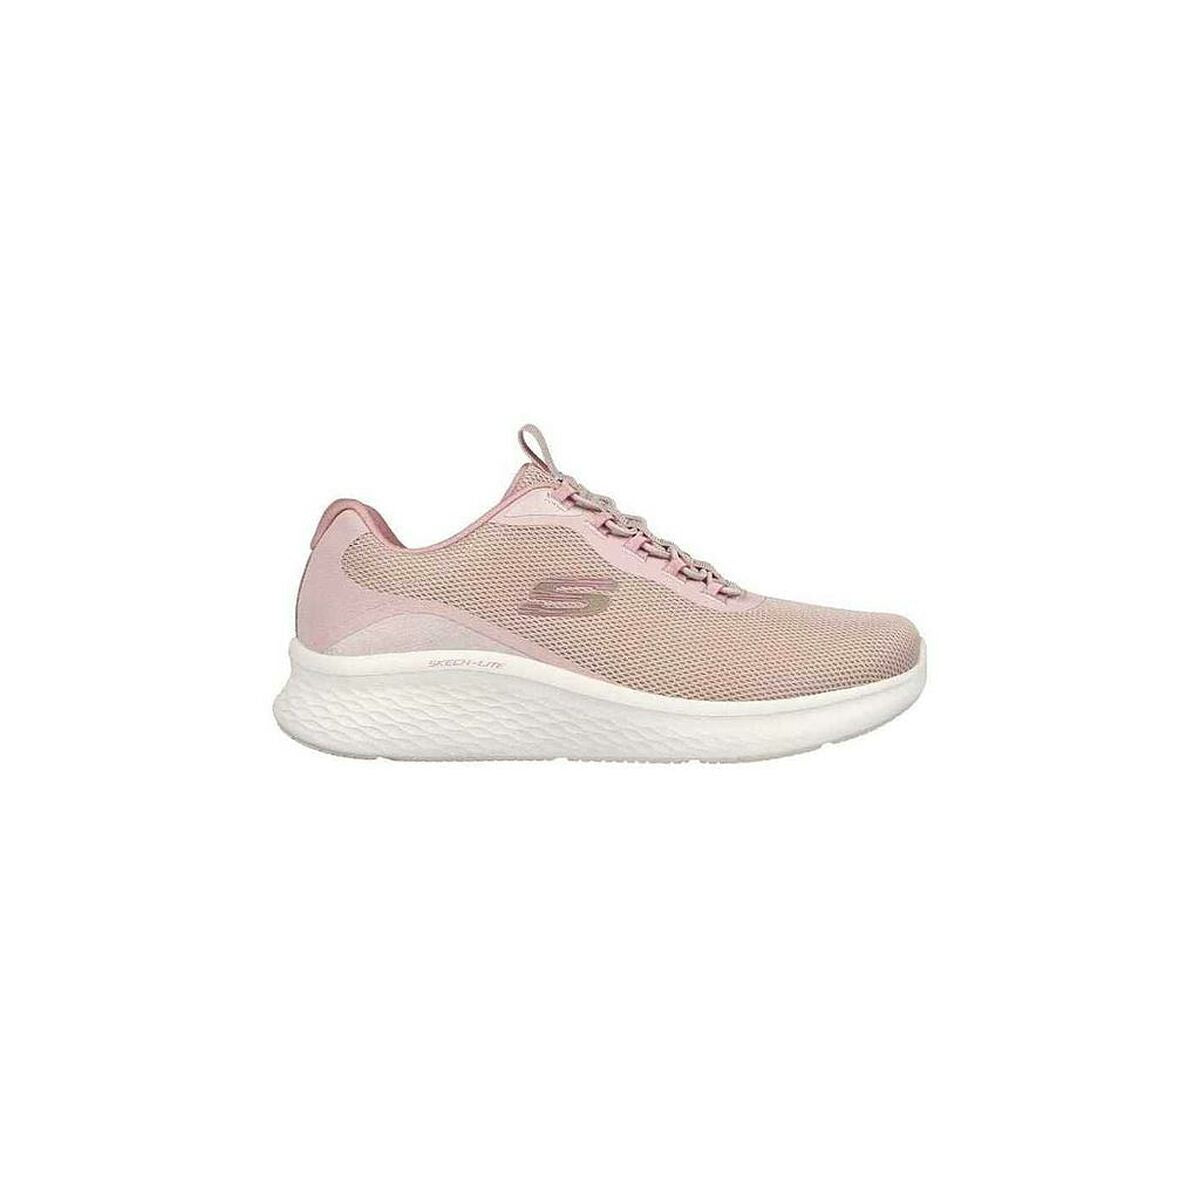 Chaussures casual femme Skechers SKECH LITE 150041 Rose